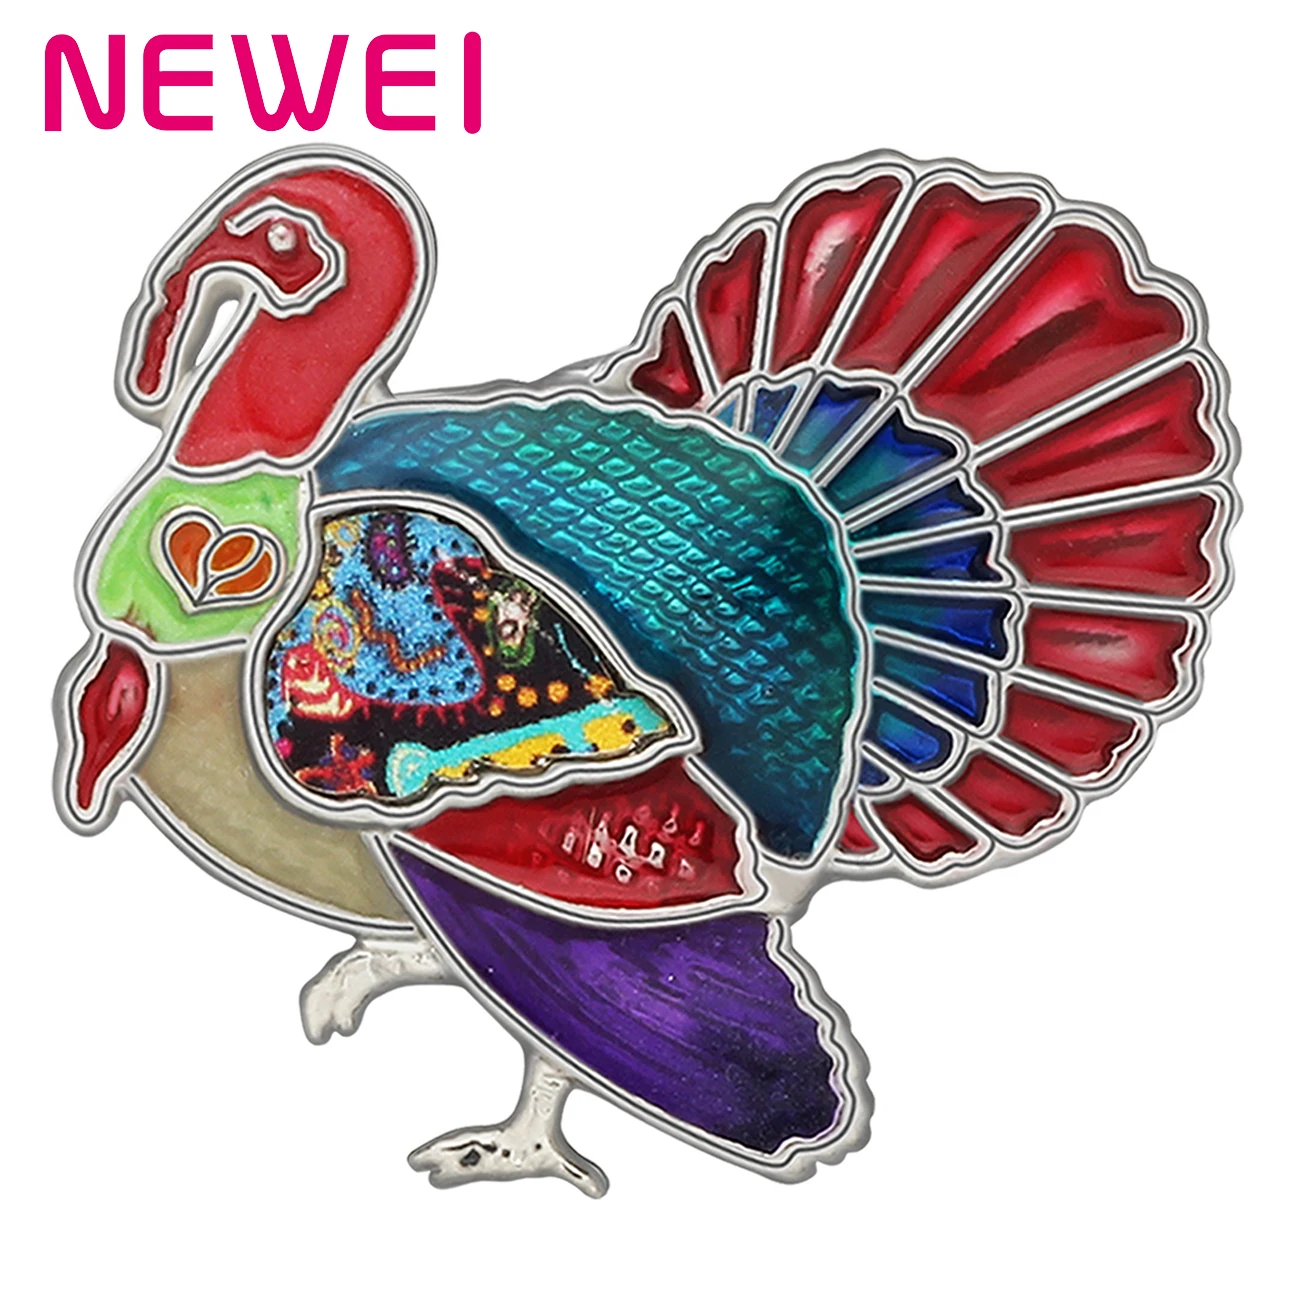 

NEWEI Enamel Alloy Thanksgiving Mental Floral Cute Turkey Chicken Brooches Pin Scarf Jewelry For Women Teens Girls Charm Party